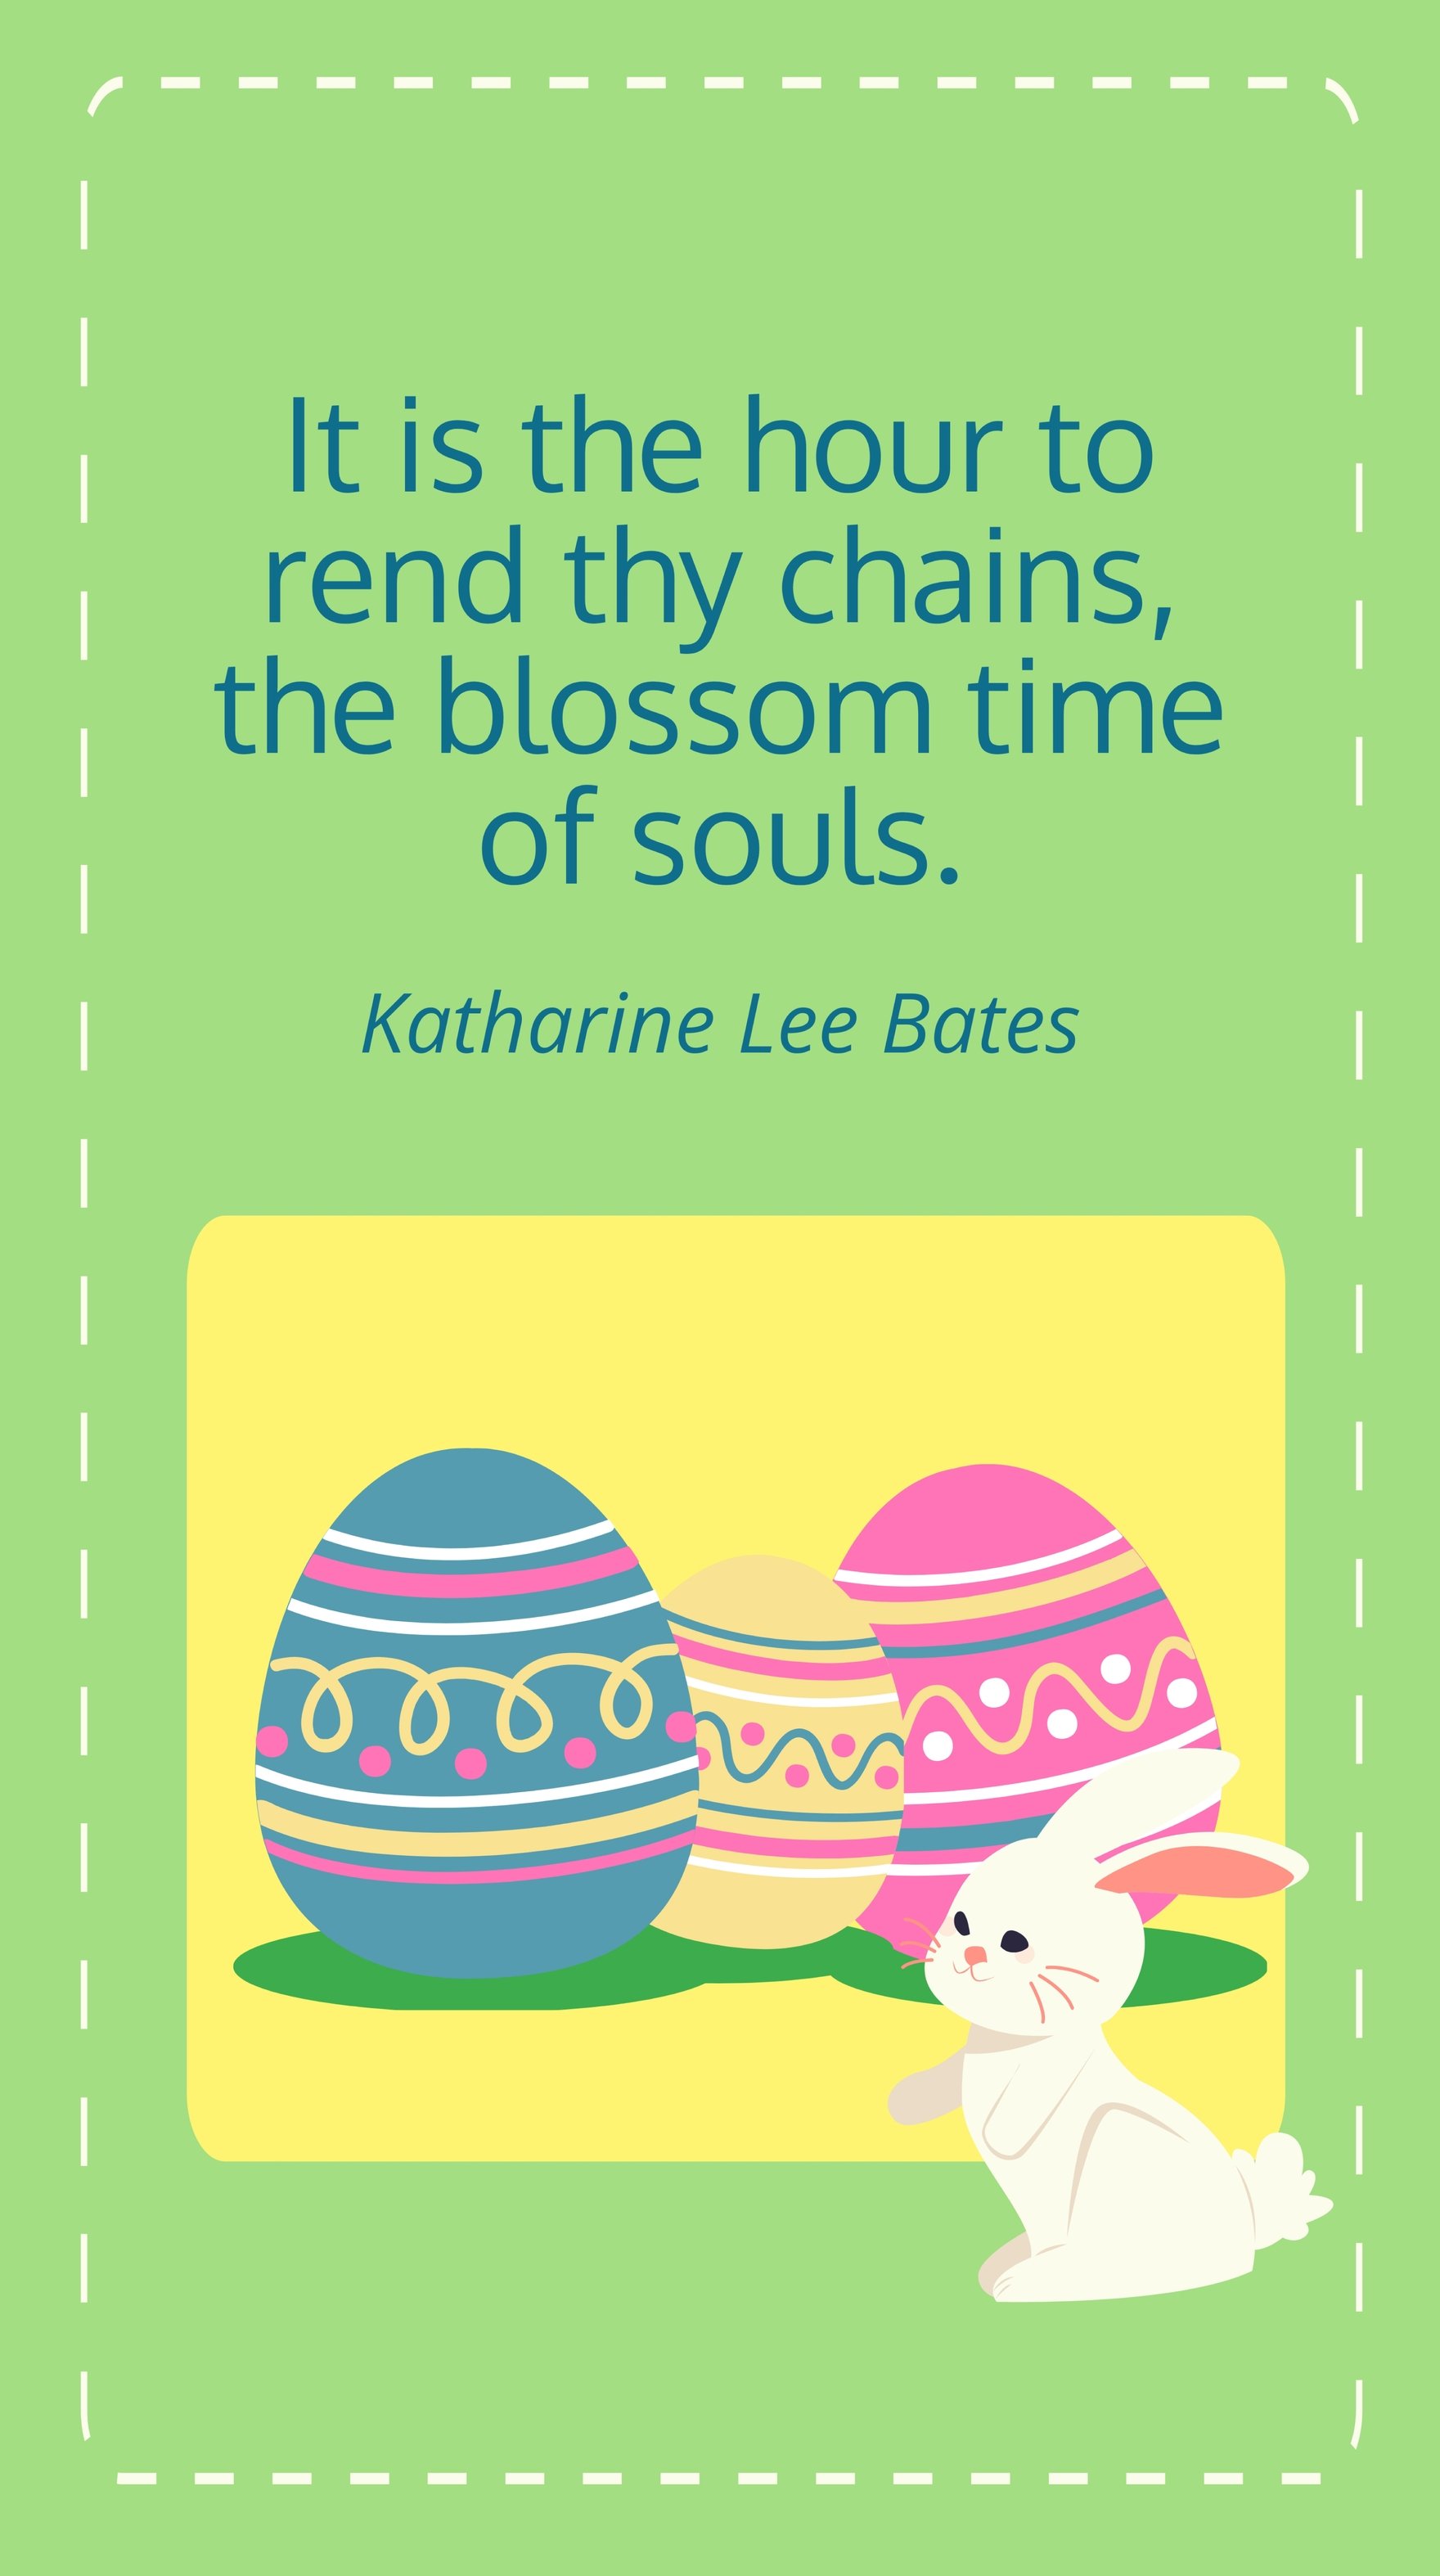 Free Katharine Lee Bates - It is the hour to rend thy chains, the blossom time of souls. in JPG